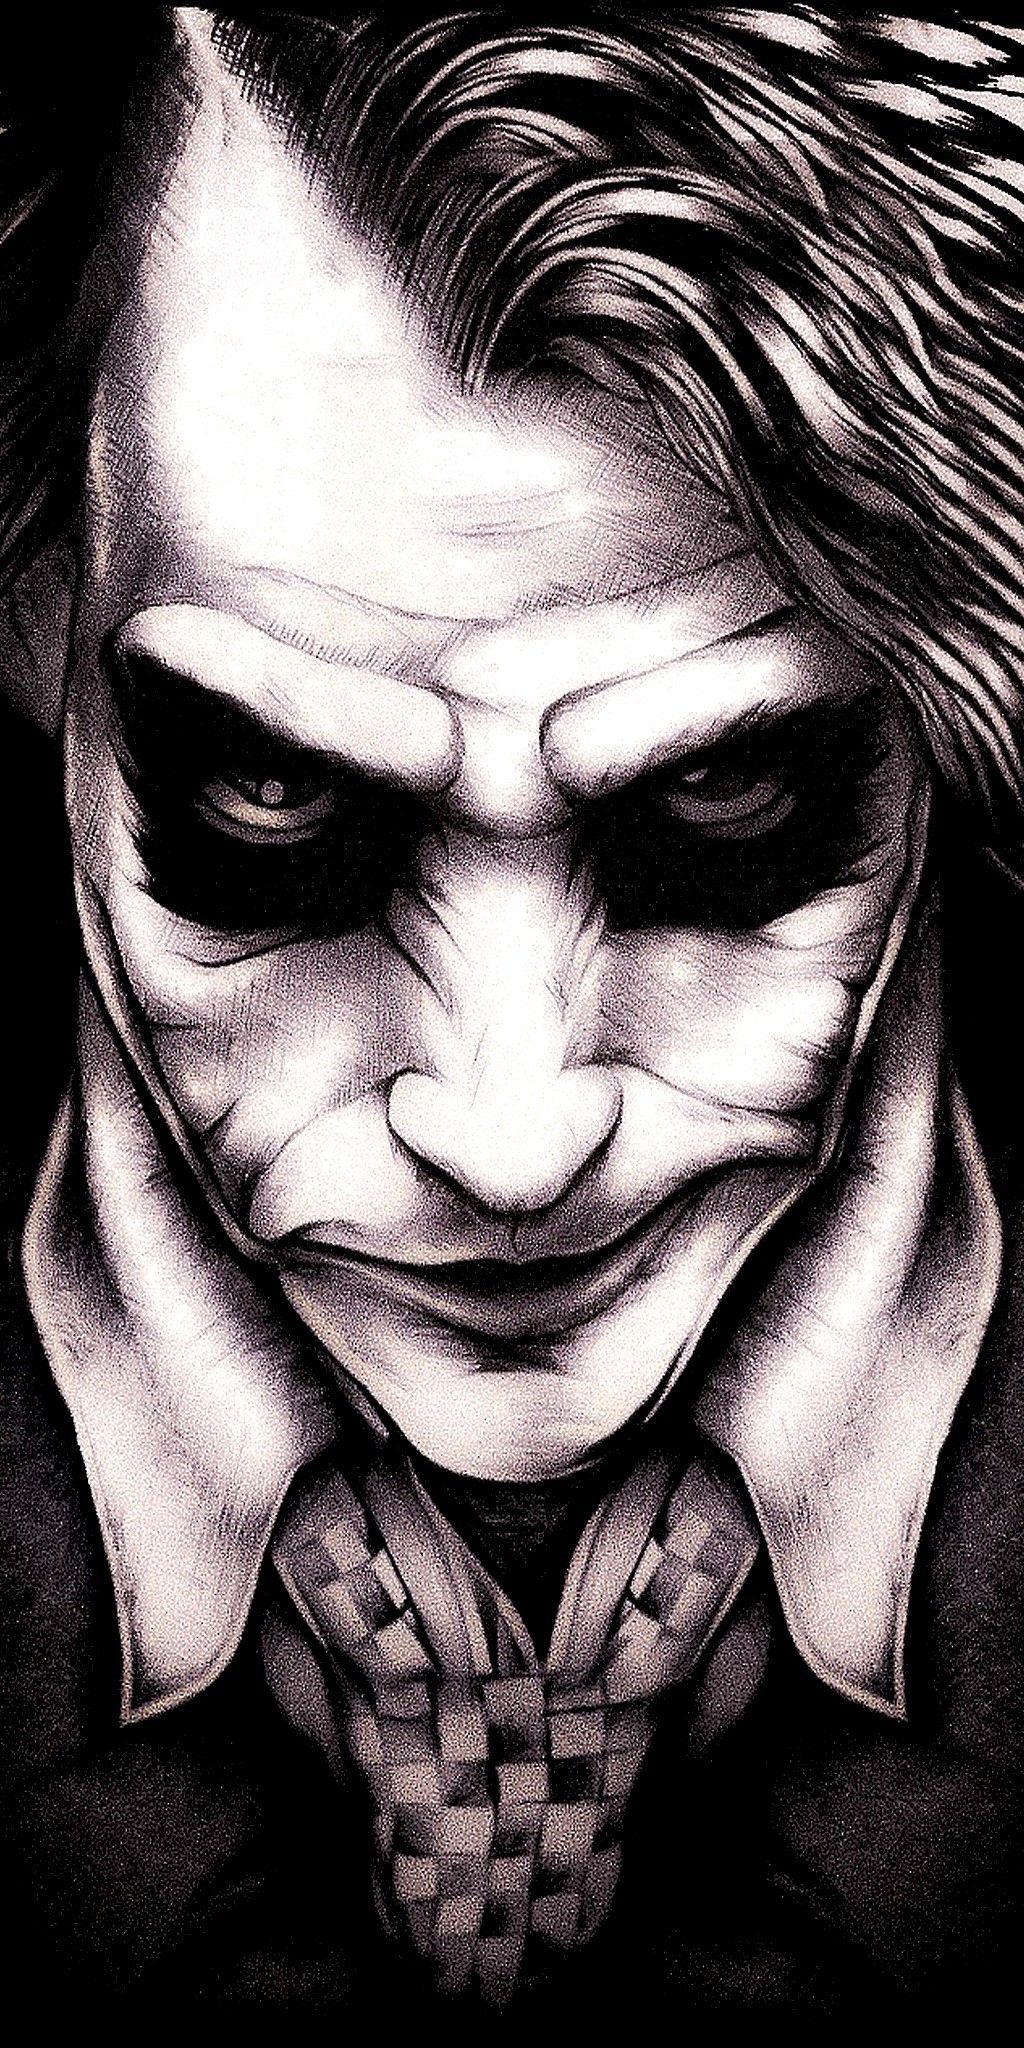 This is the Joker. Absolute lunatic. Considered extremely